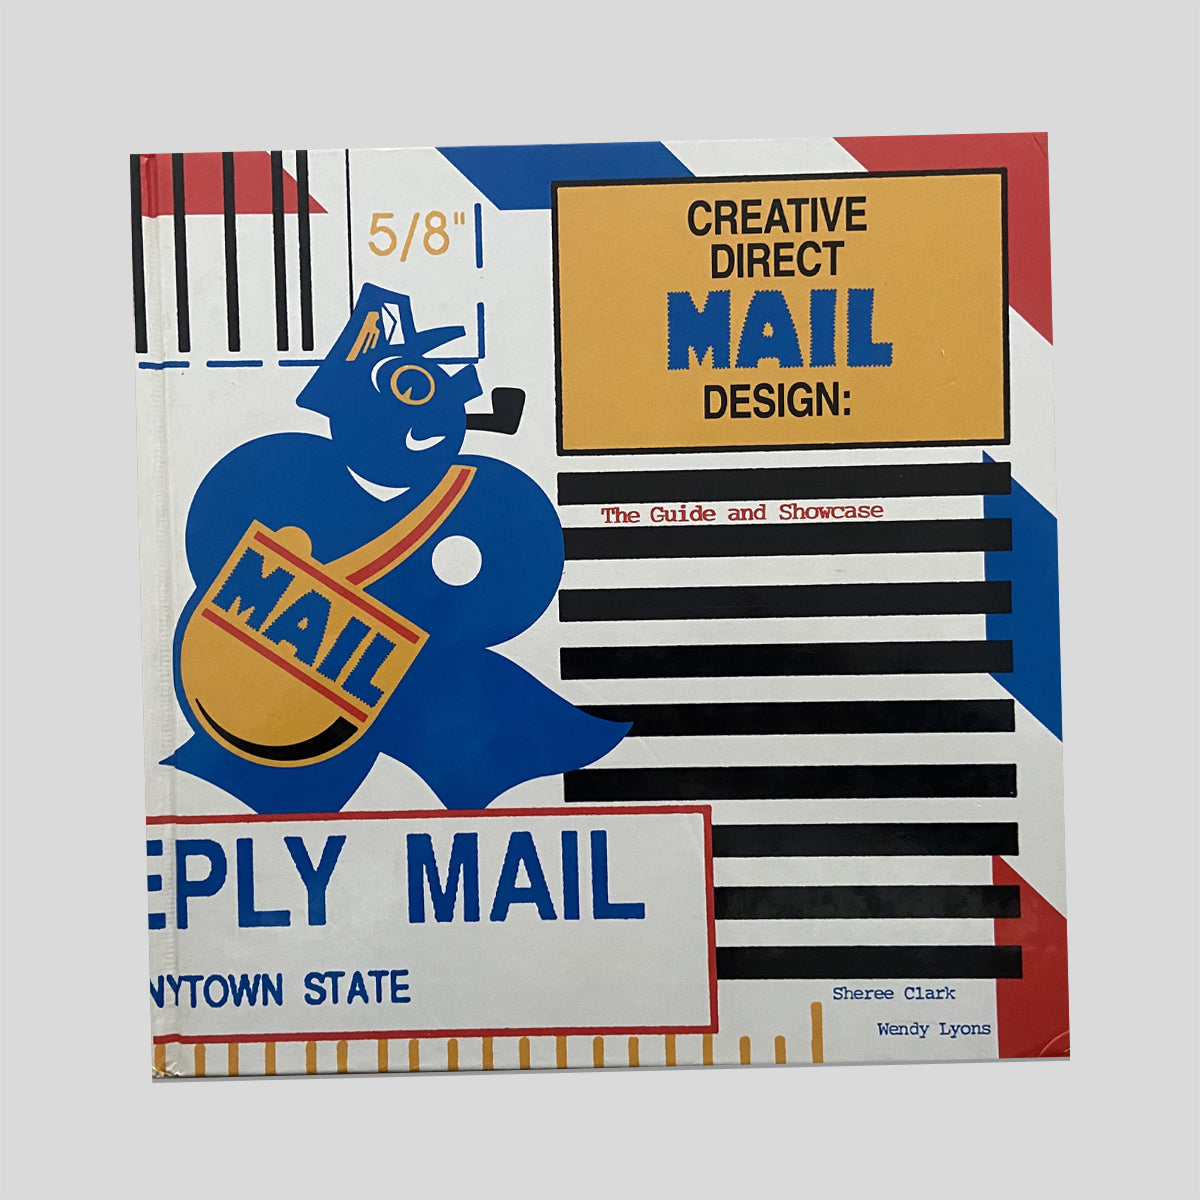 Creative Direct Mail Design: The Guide and Showcase